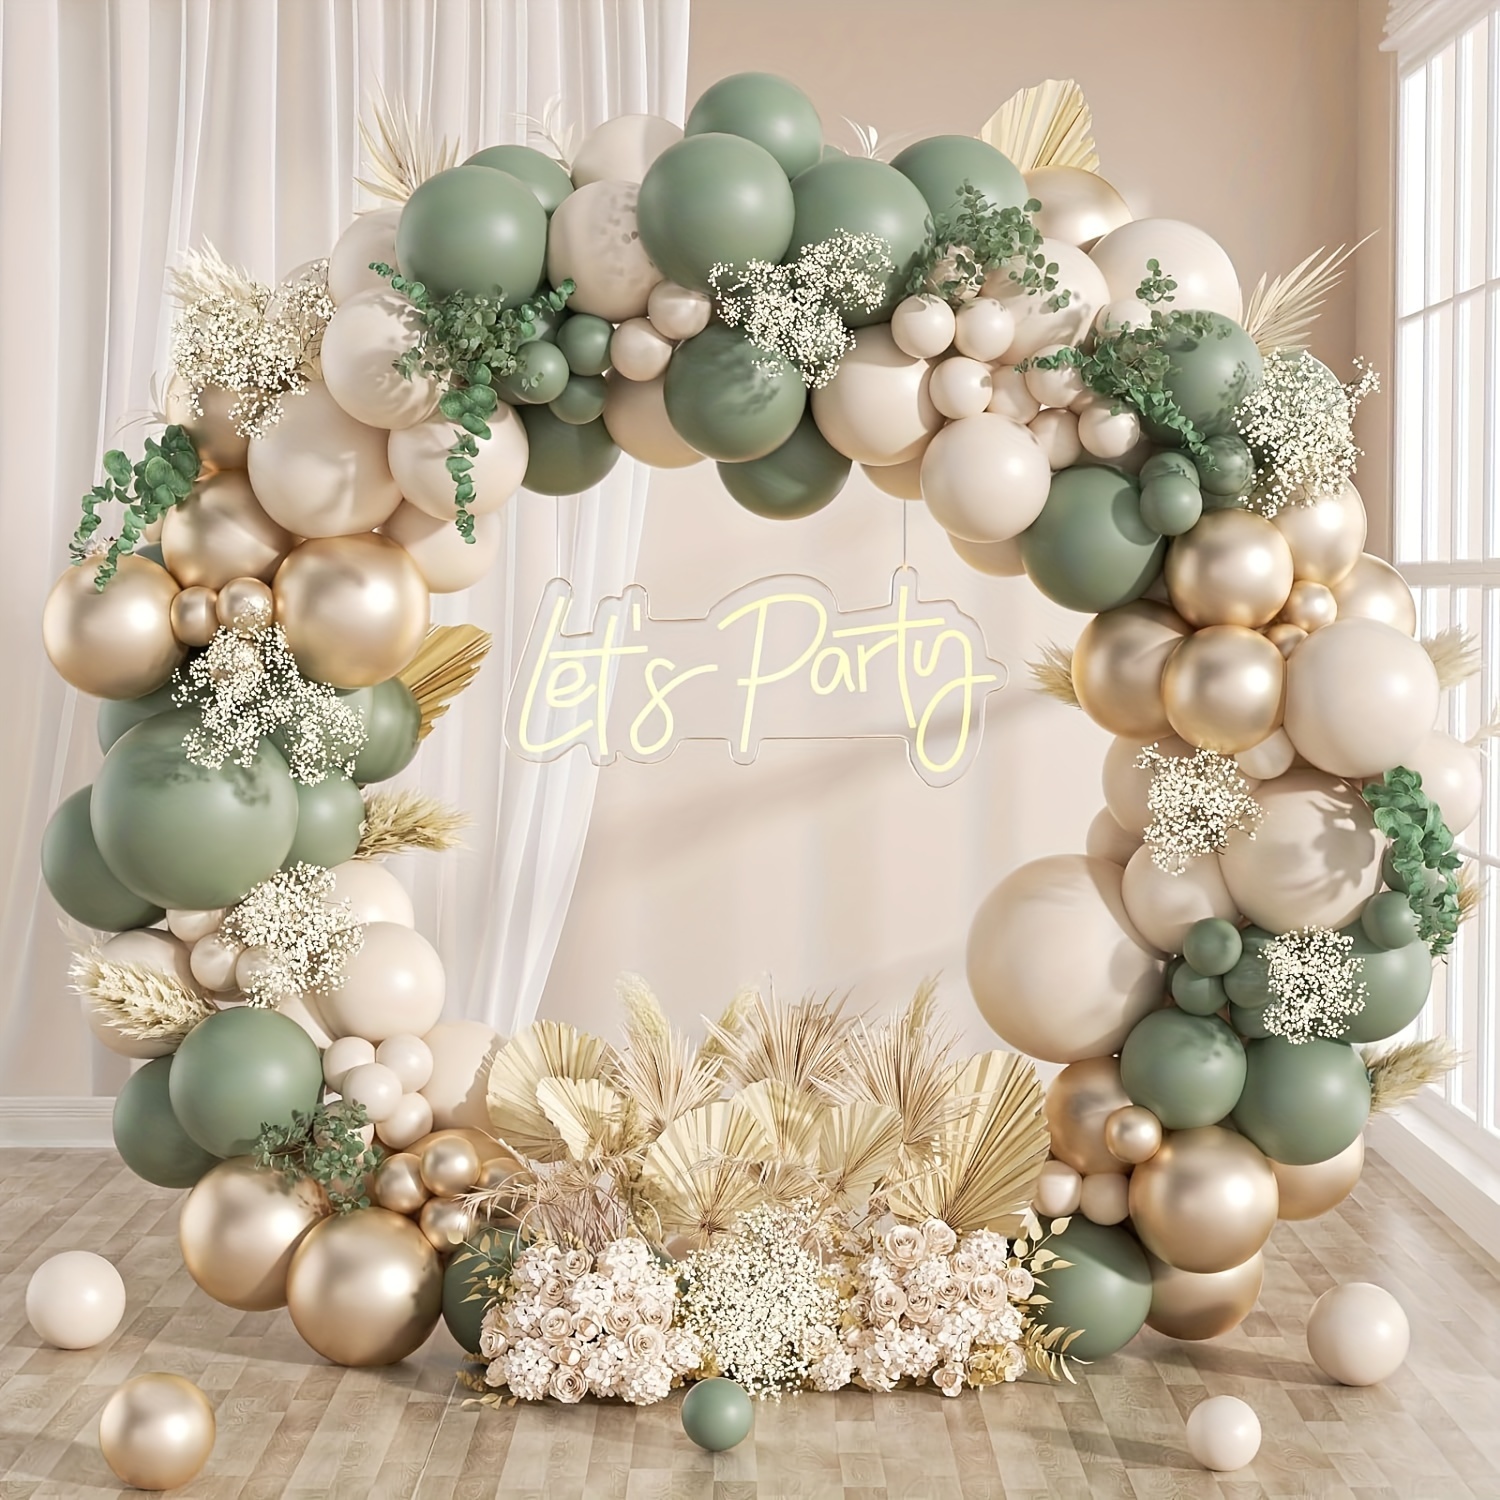 

130pcs Elegant Balloon Arch Kit - Sage Green, White & Metallic Gold Latex Balloons With Ribbon, Chain And Adhesive Points For Bridal, Engagement, Birthday Party & Baby Shower Decor, Age 14+